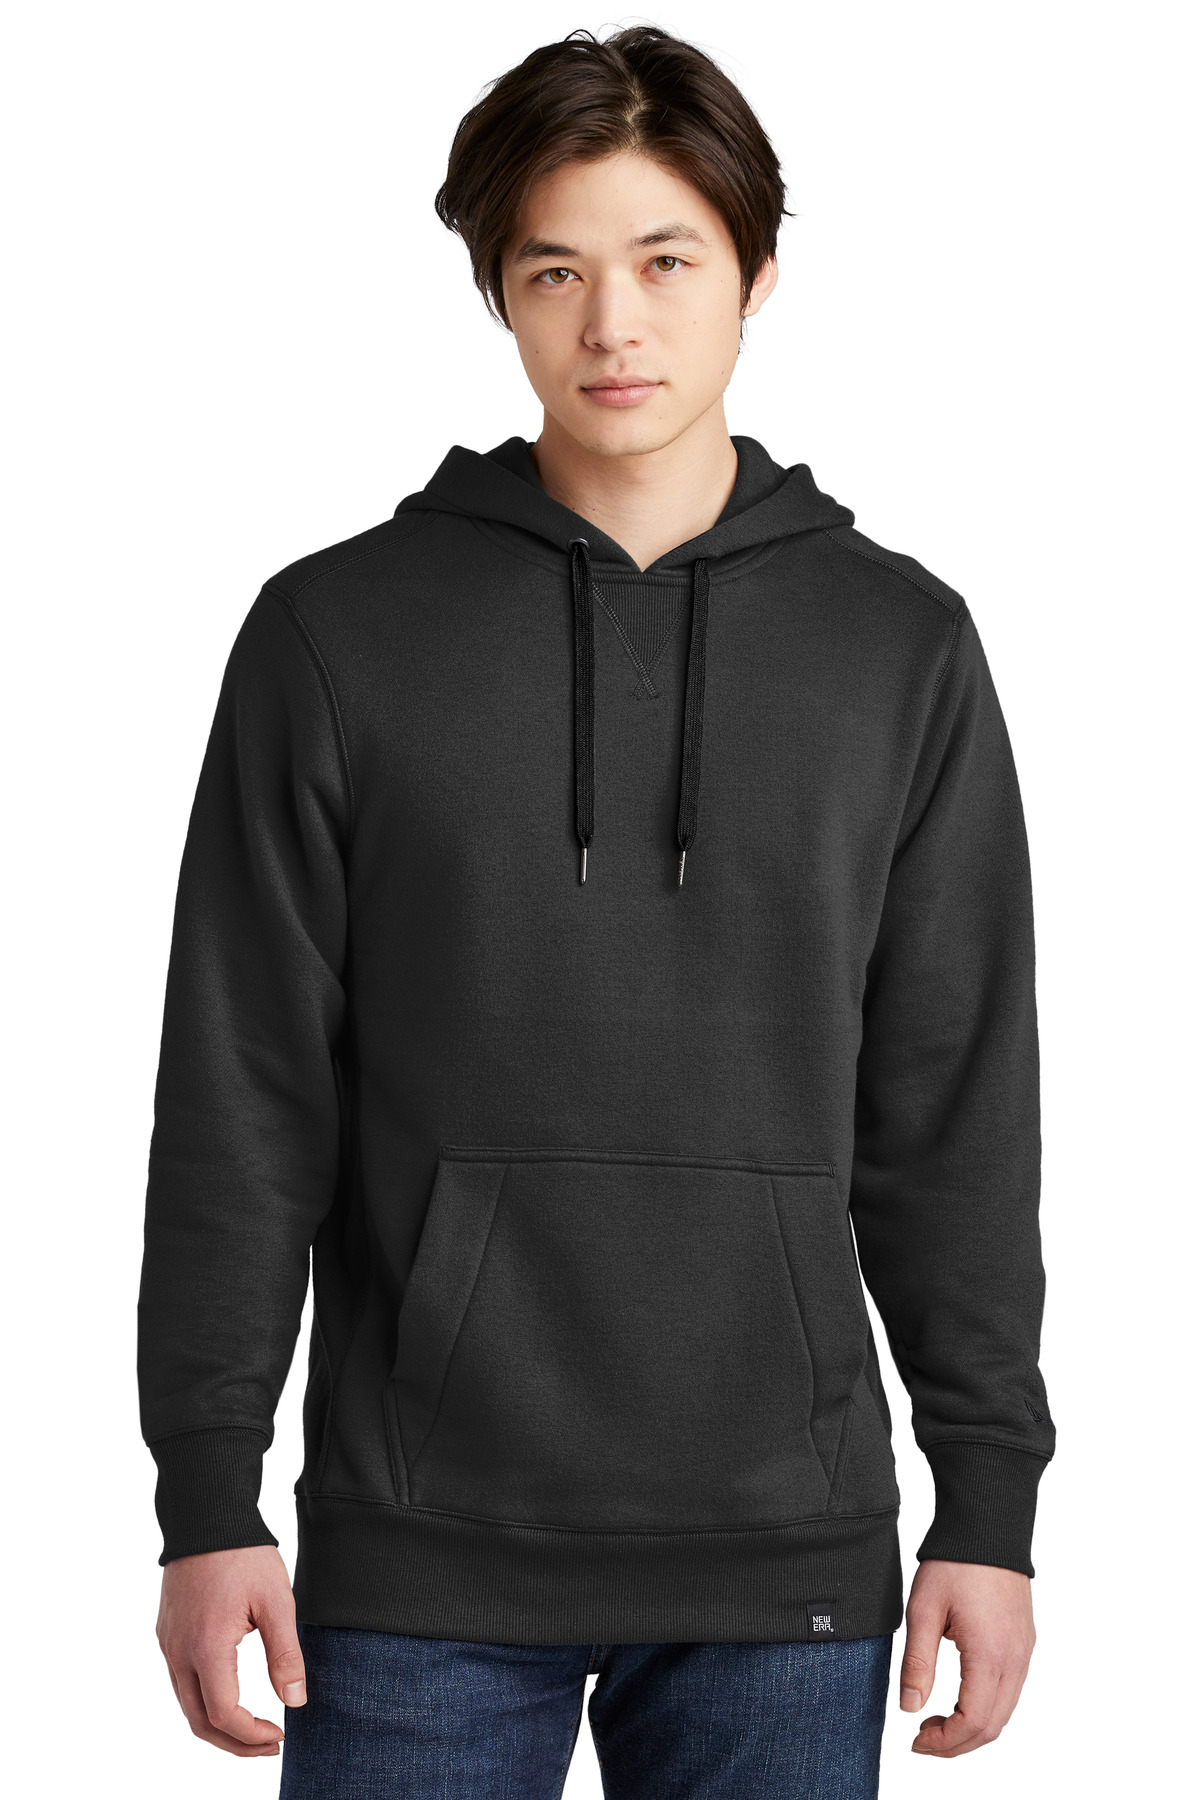 New Era French Terry Pullover Hoodie-New Era